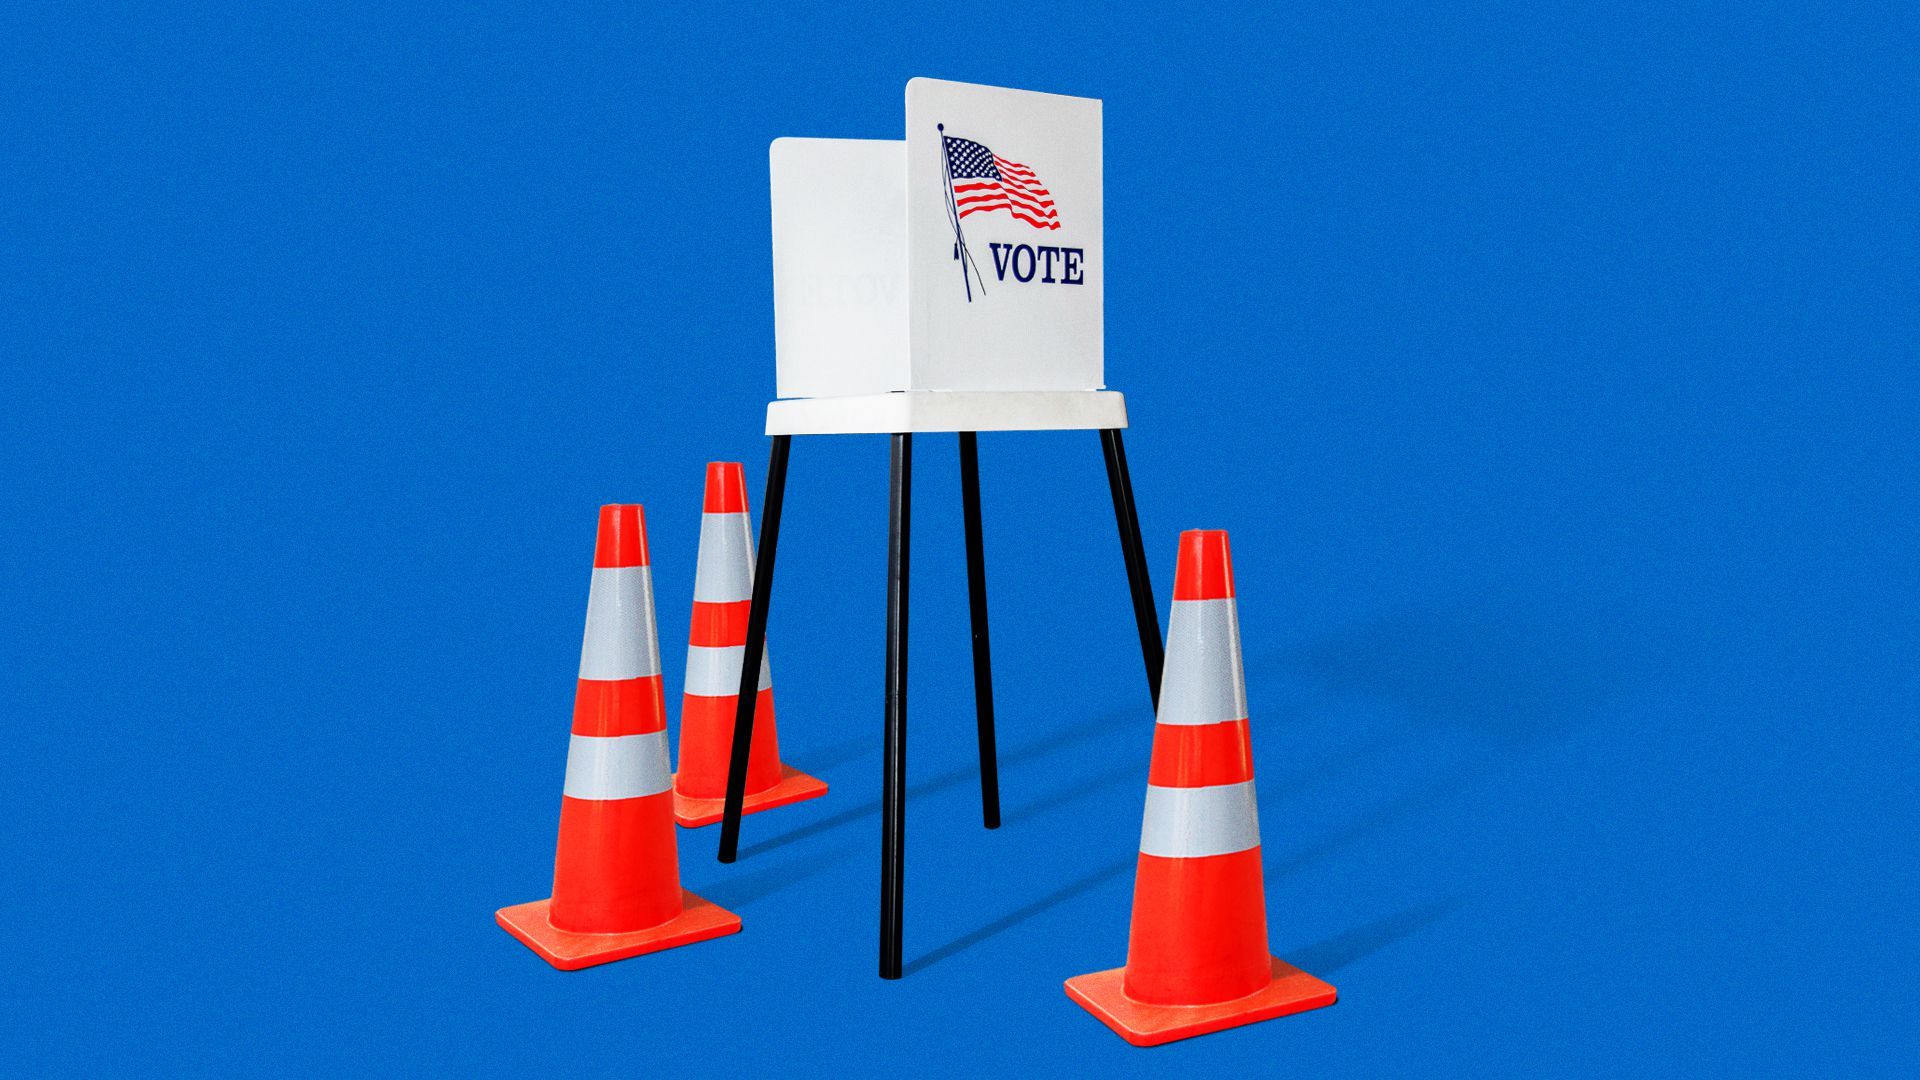 Illustration of a voting booth on a blue background surrounded by safety cones.